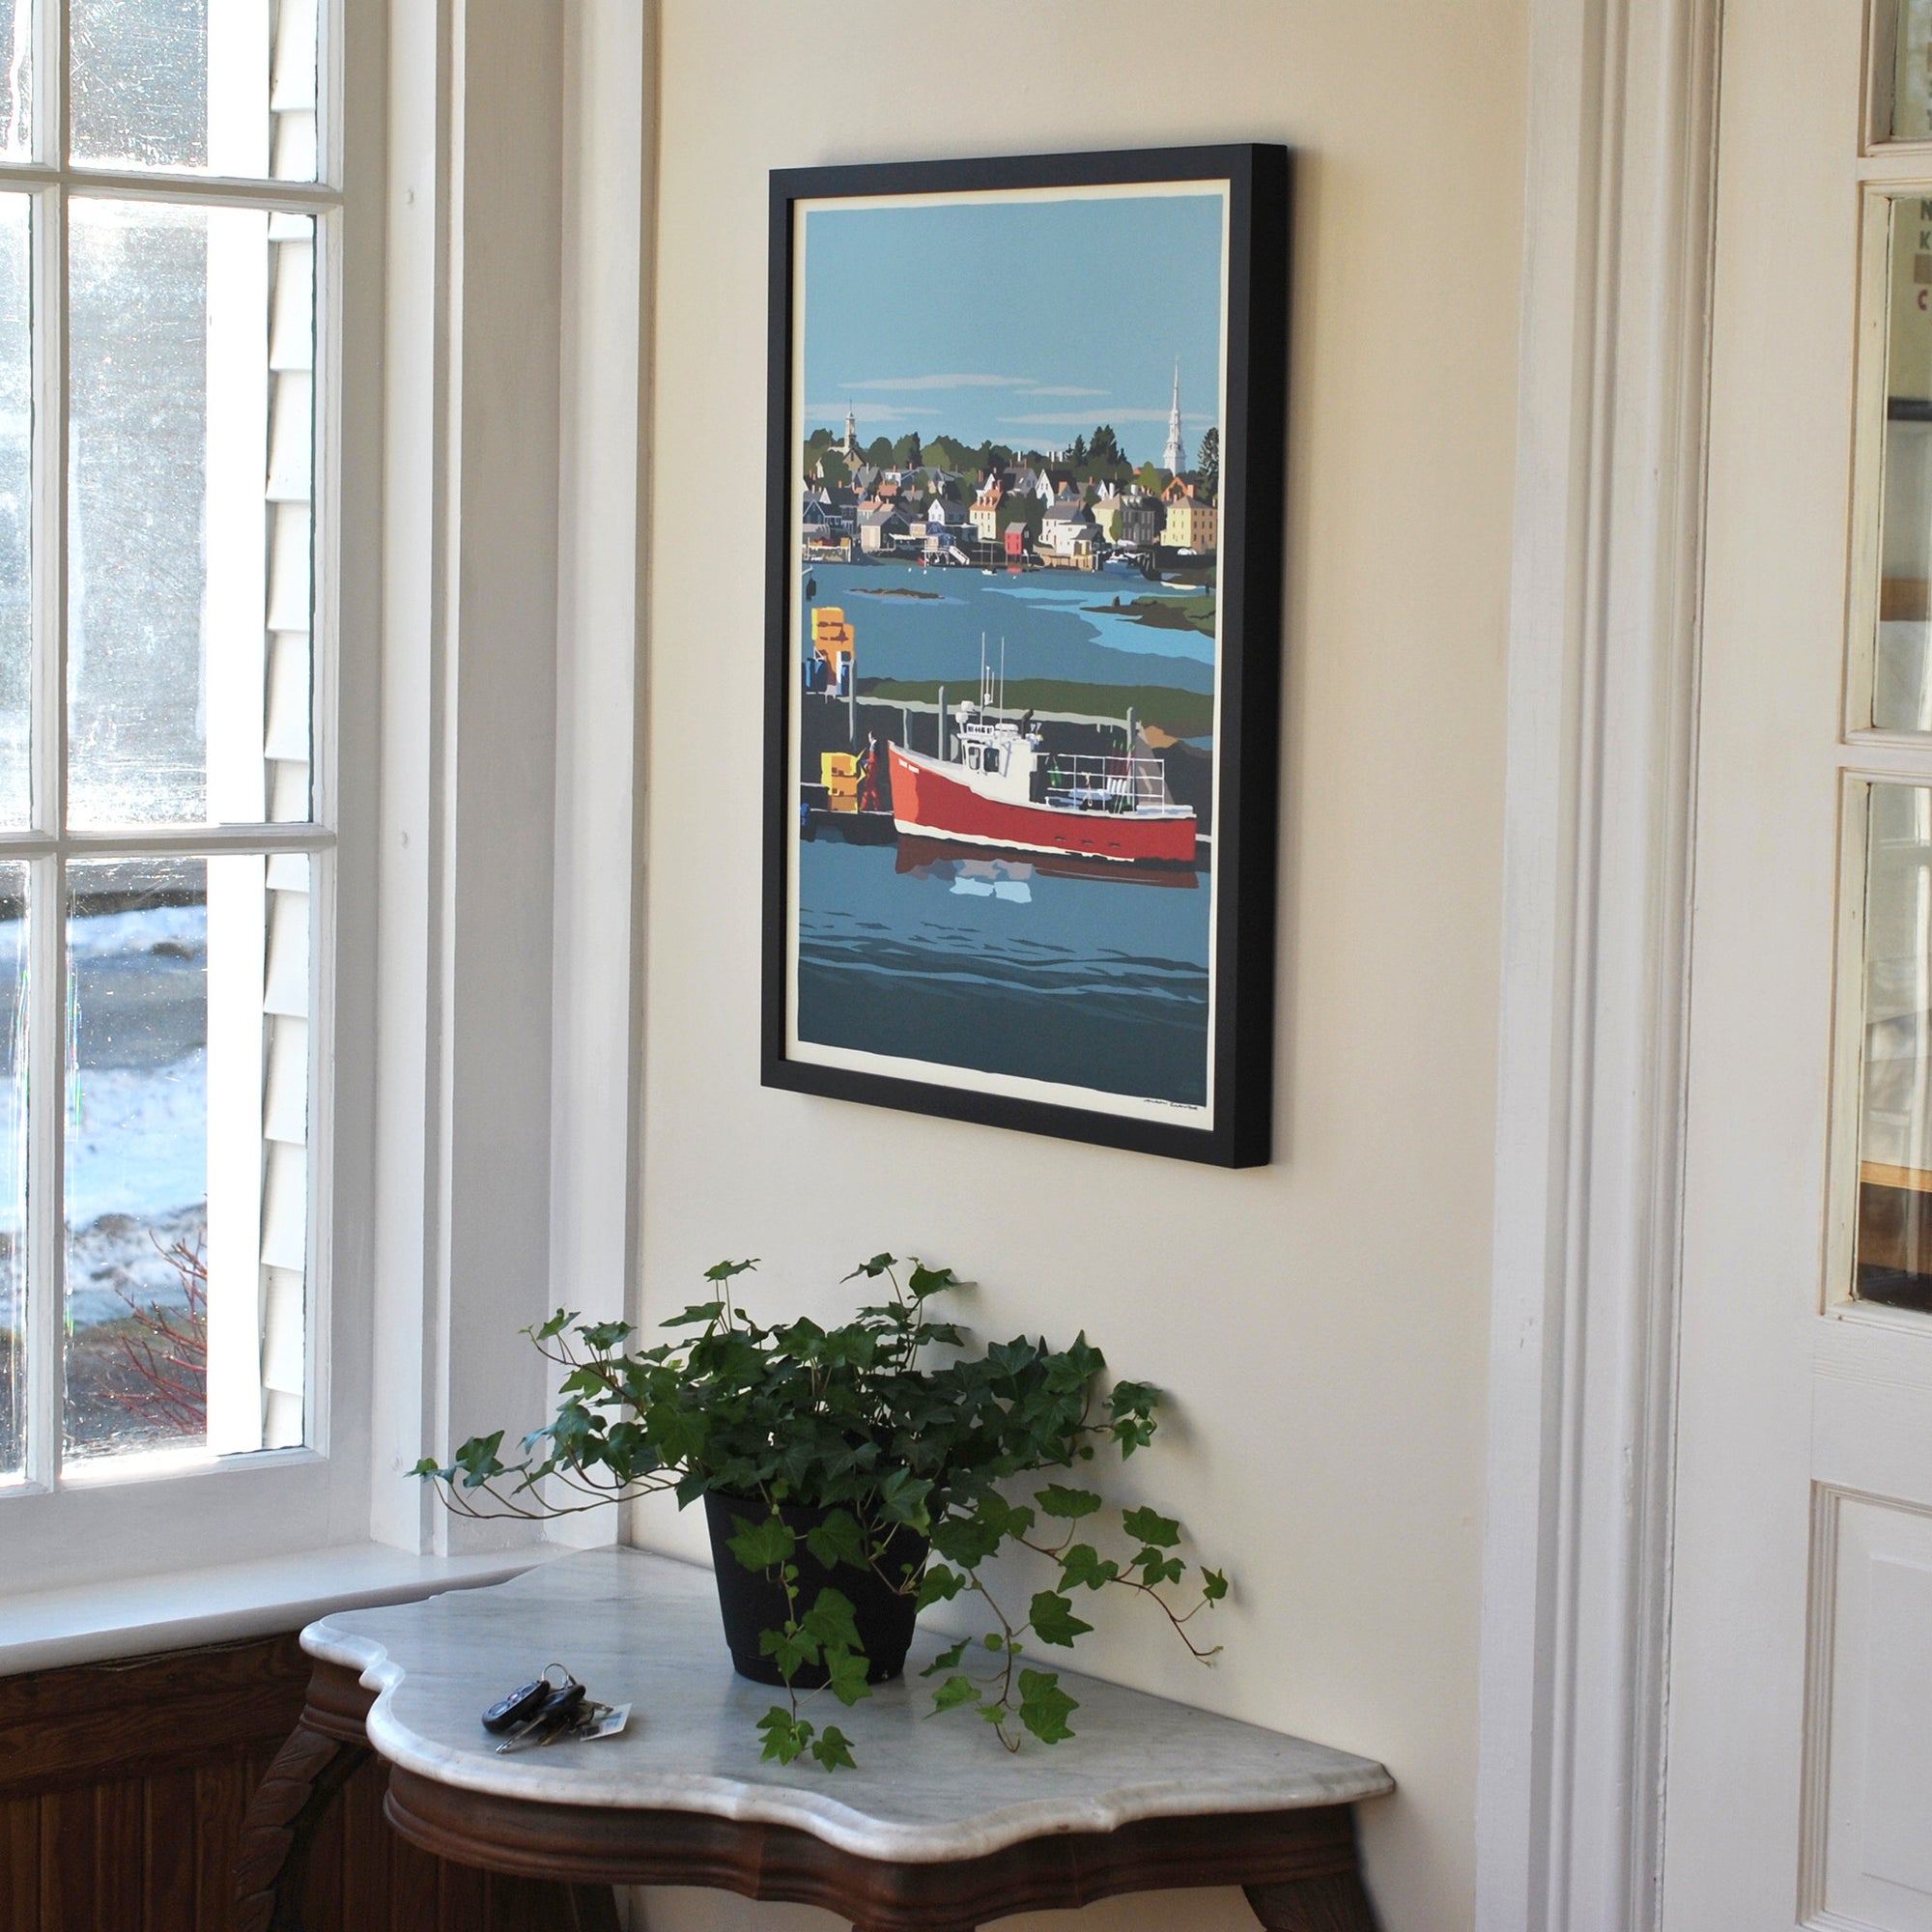 Red Lobster Boat Art Print 18" x 24" Framed Wall Poster By Alan Claude - New Hampshire